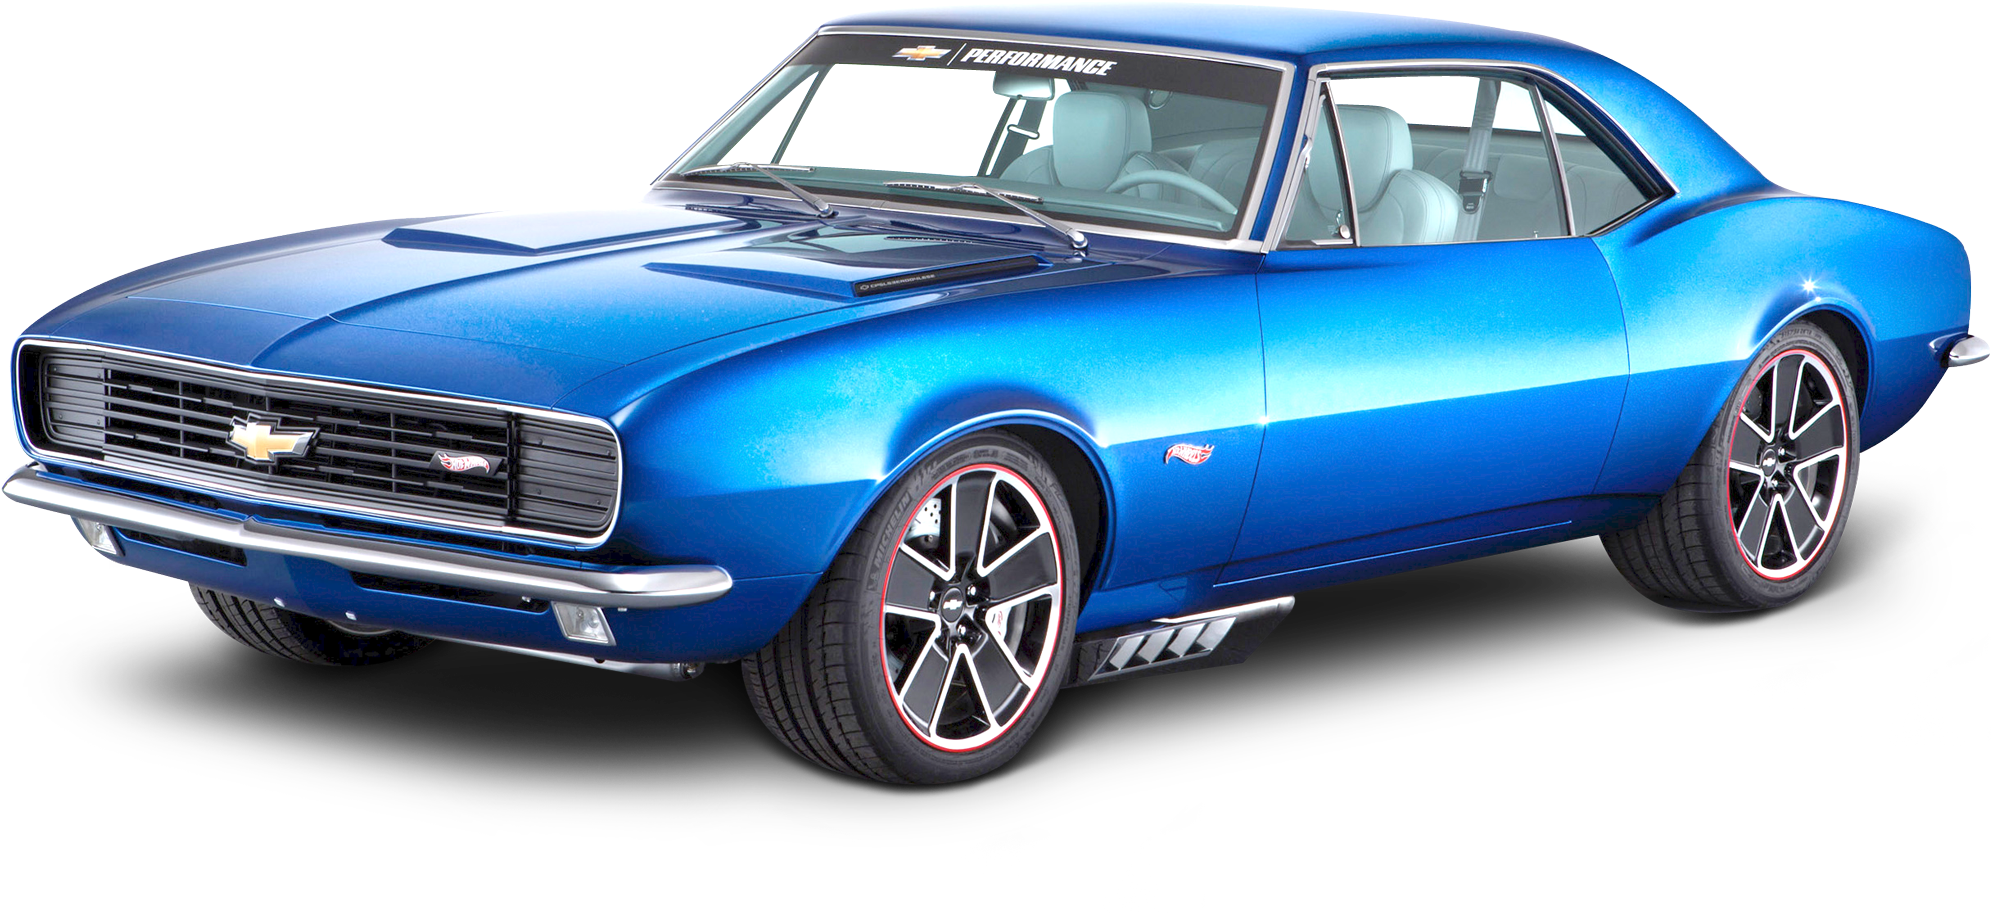 Download and share clipart about Chevrolet Png - 67 Camaro, Find more high ...